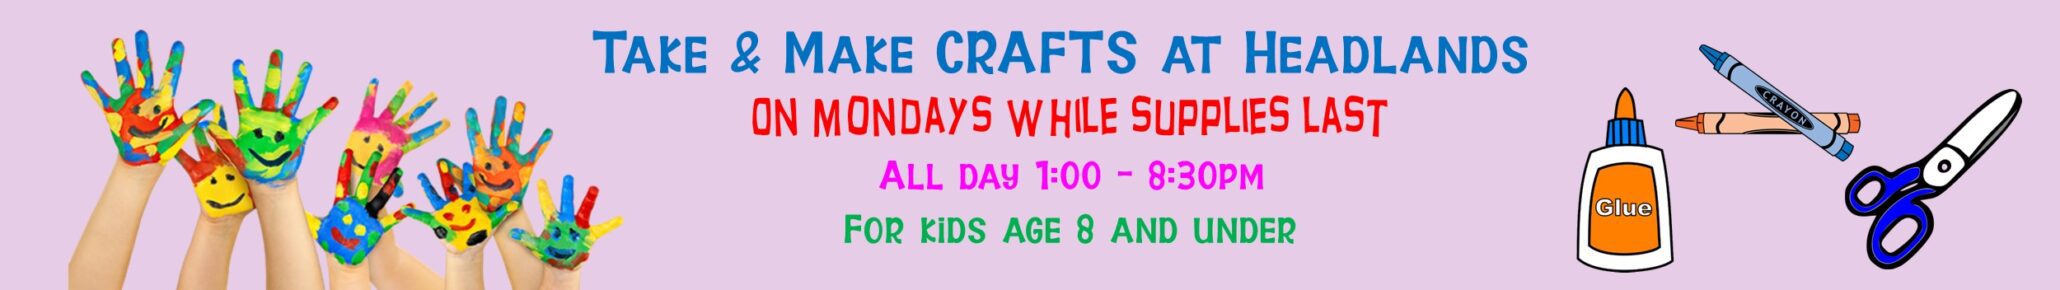 take and make crafts at the headlands branch on mondays